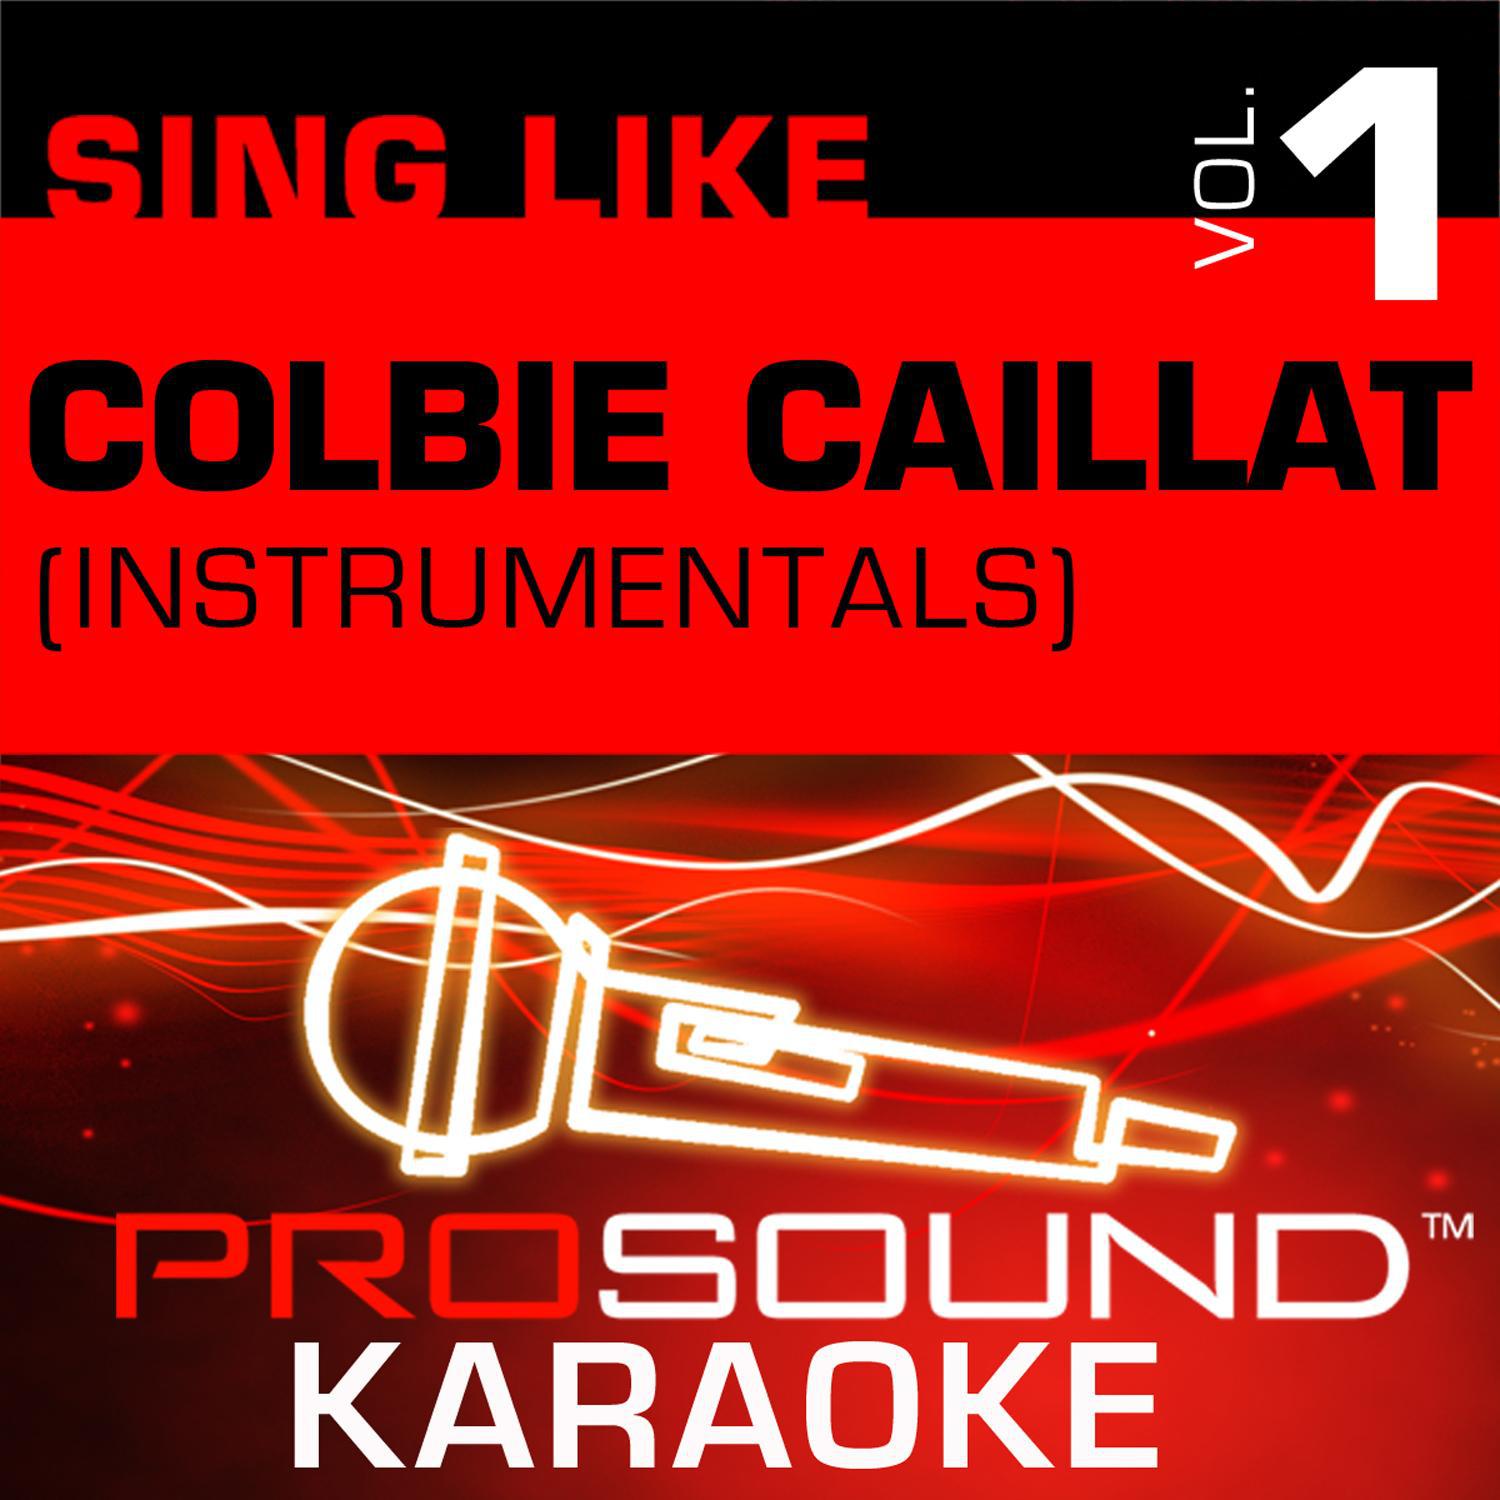 Bubbly (Karaoke Lead Vocal Demo) [In the Style of Colbie Caillat]